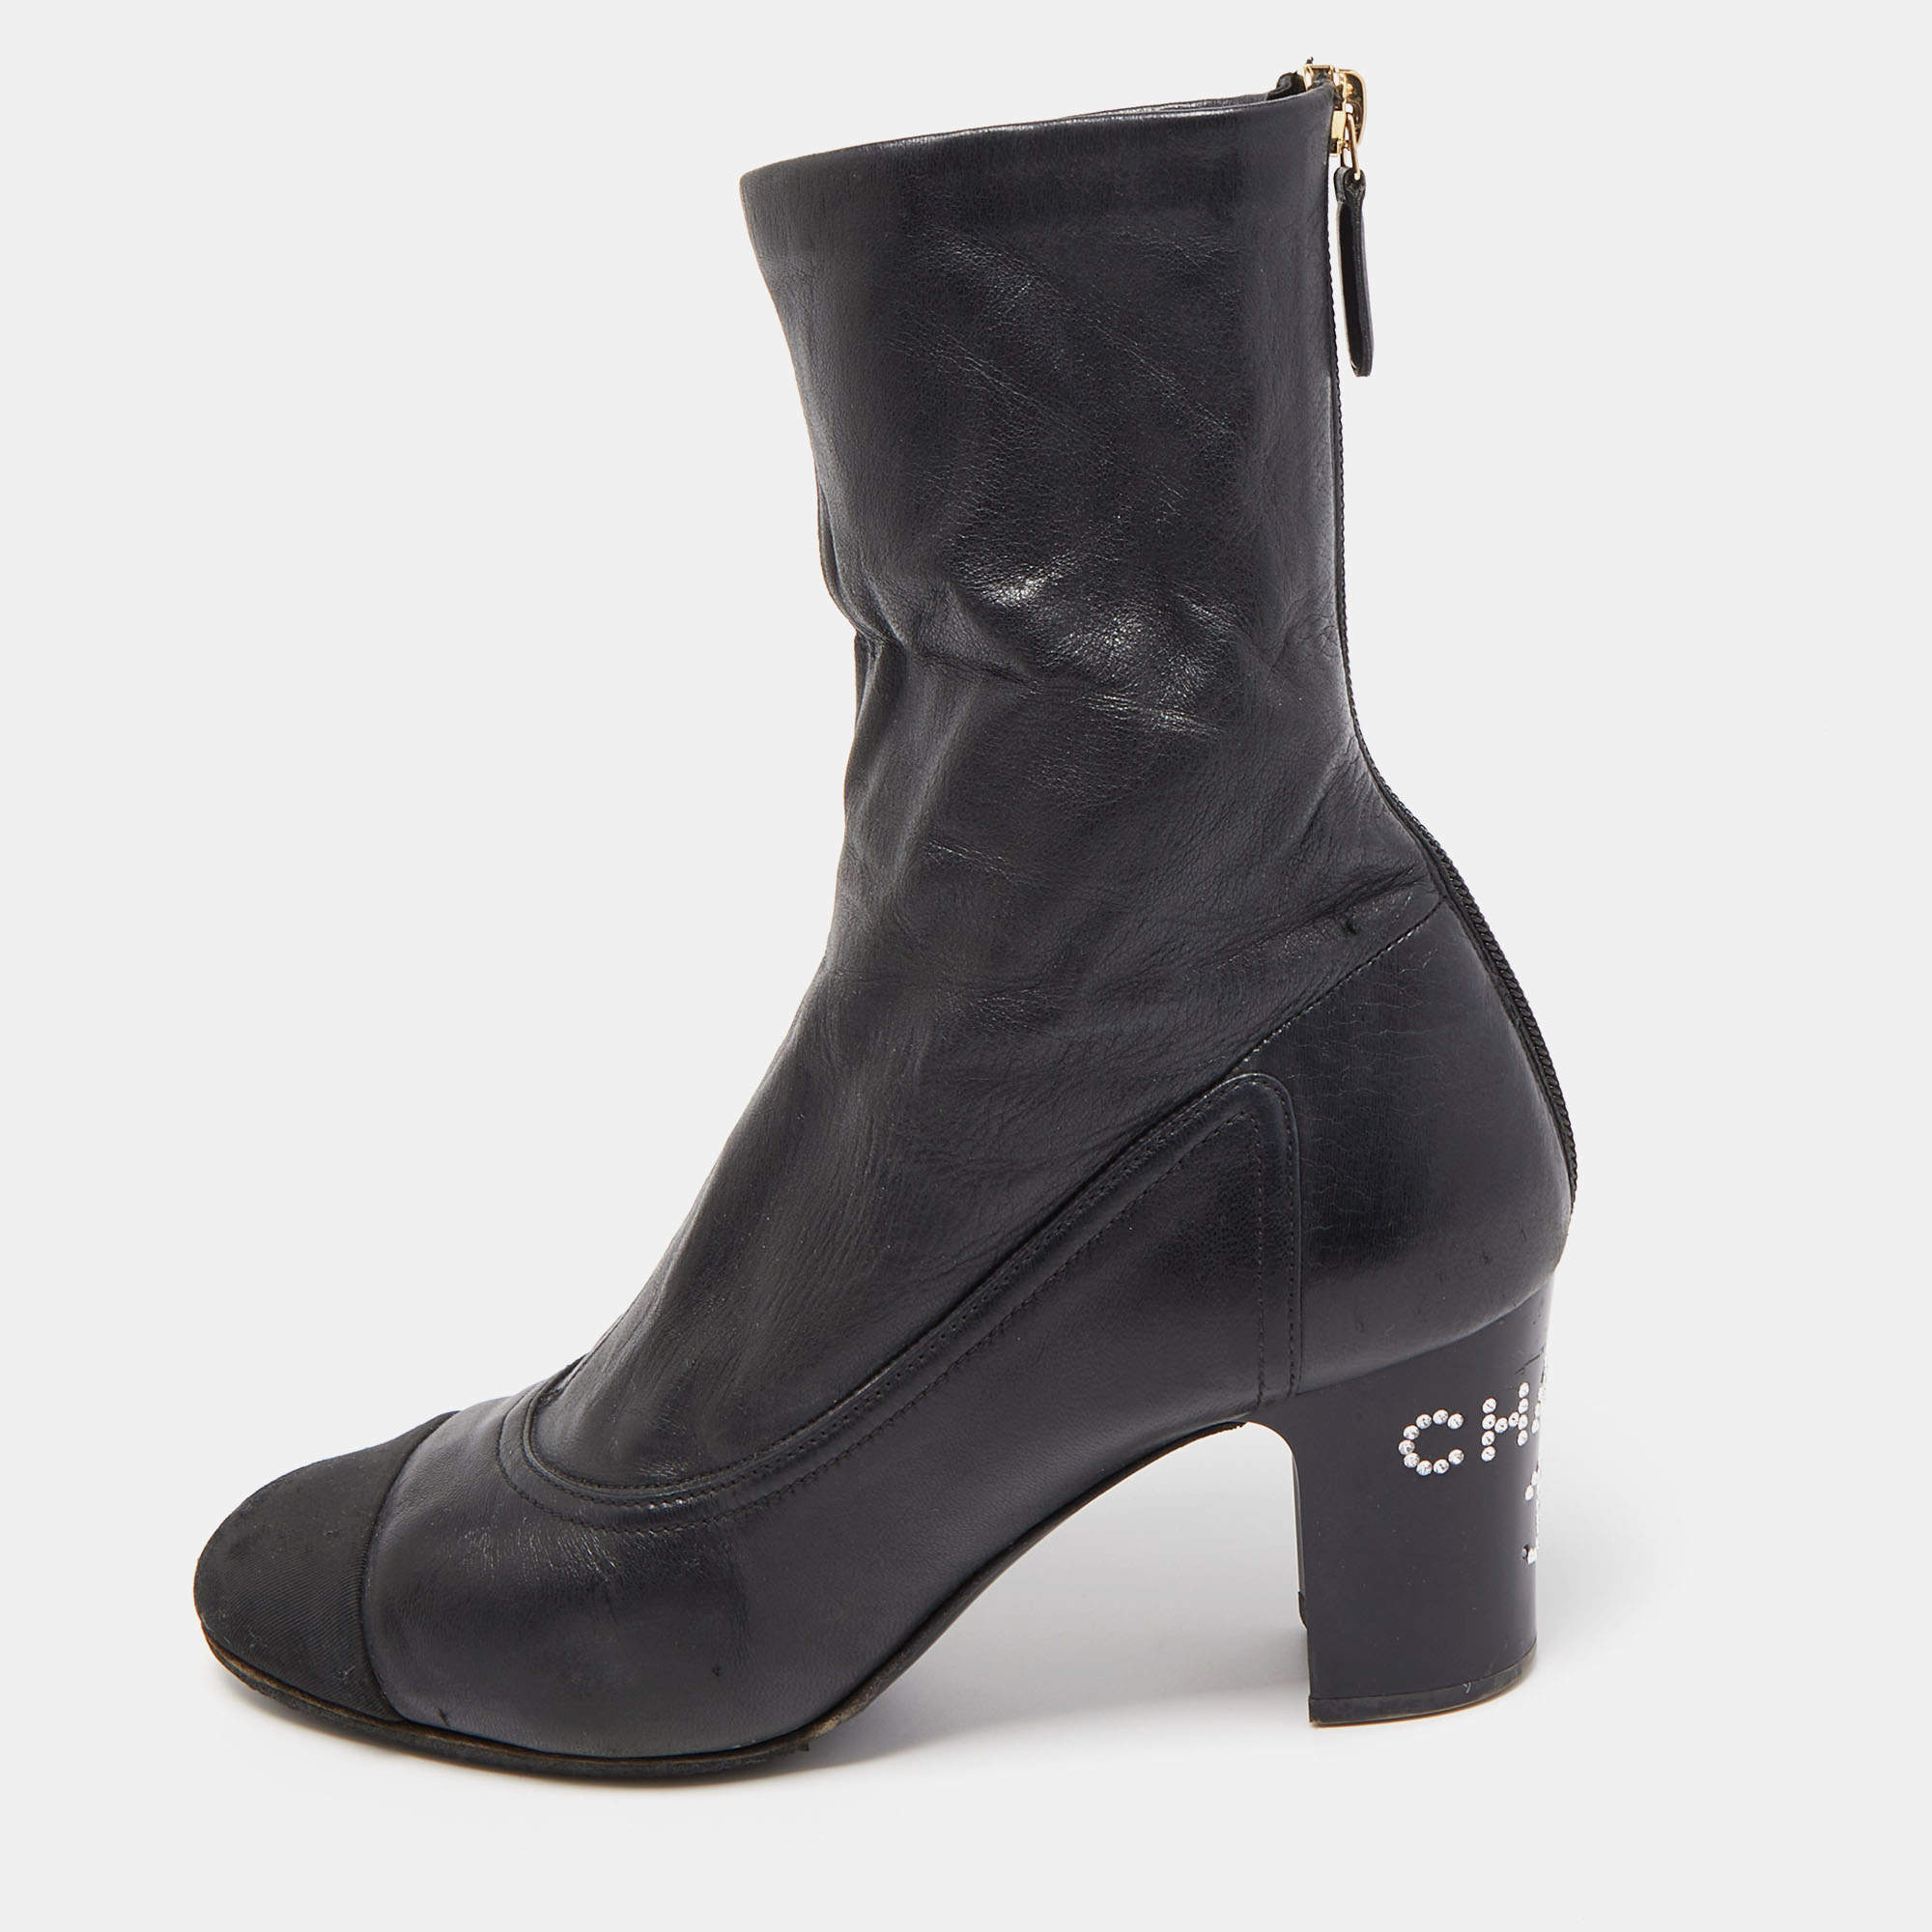 CHANEL Women's Ankle boots Leather in Gold Size: EU 39,5